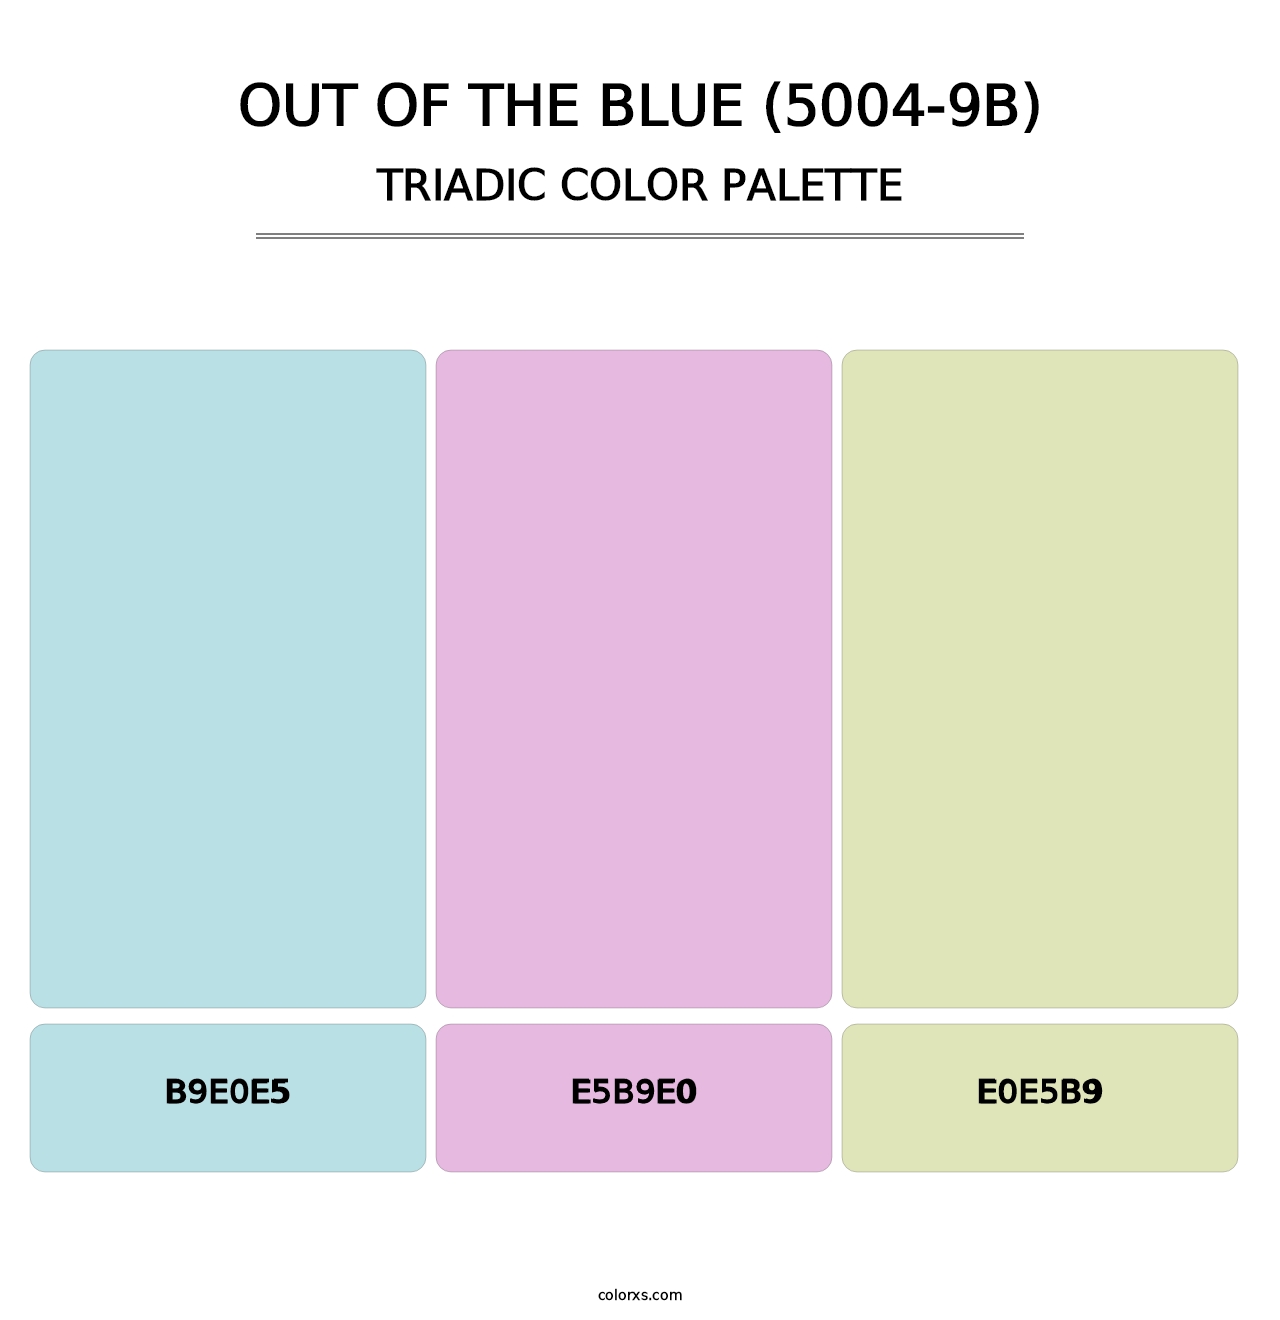 Out of the Blue (5004-9B) - Triadic Color Palette